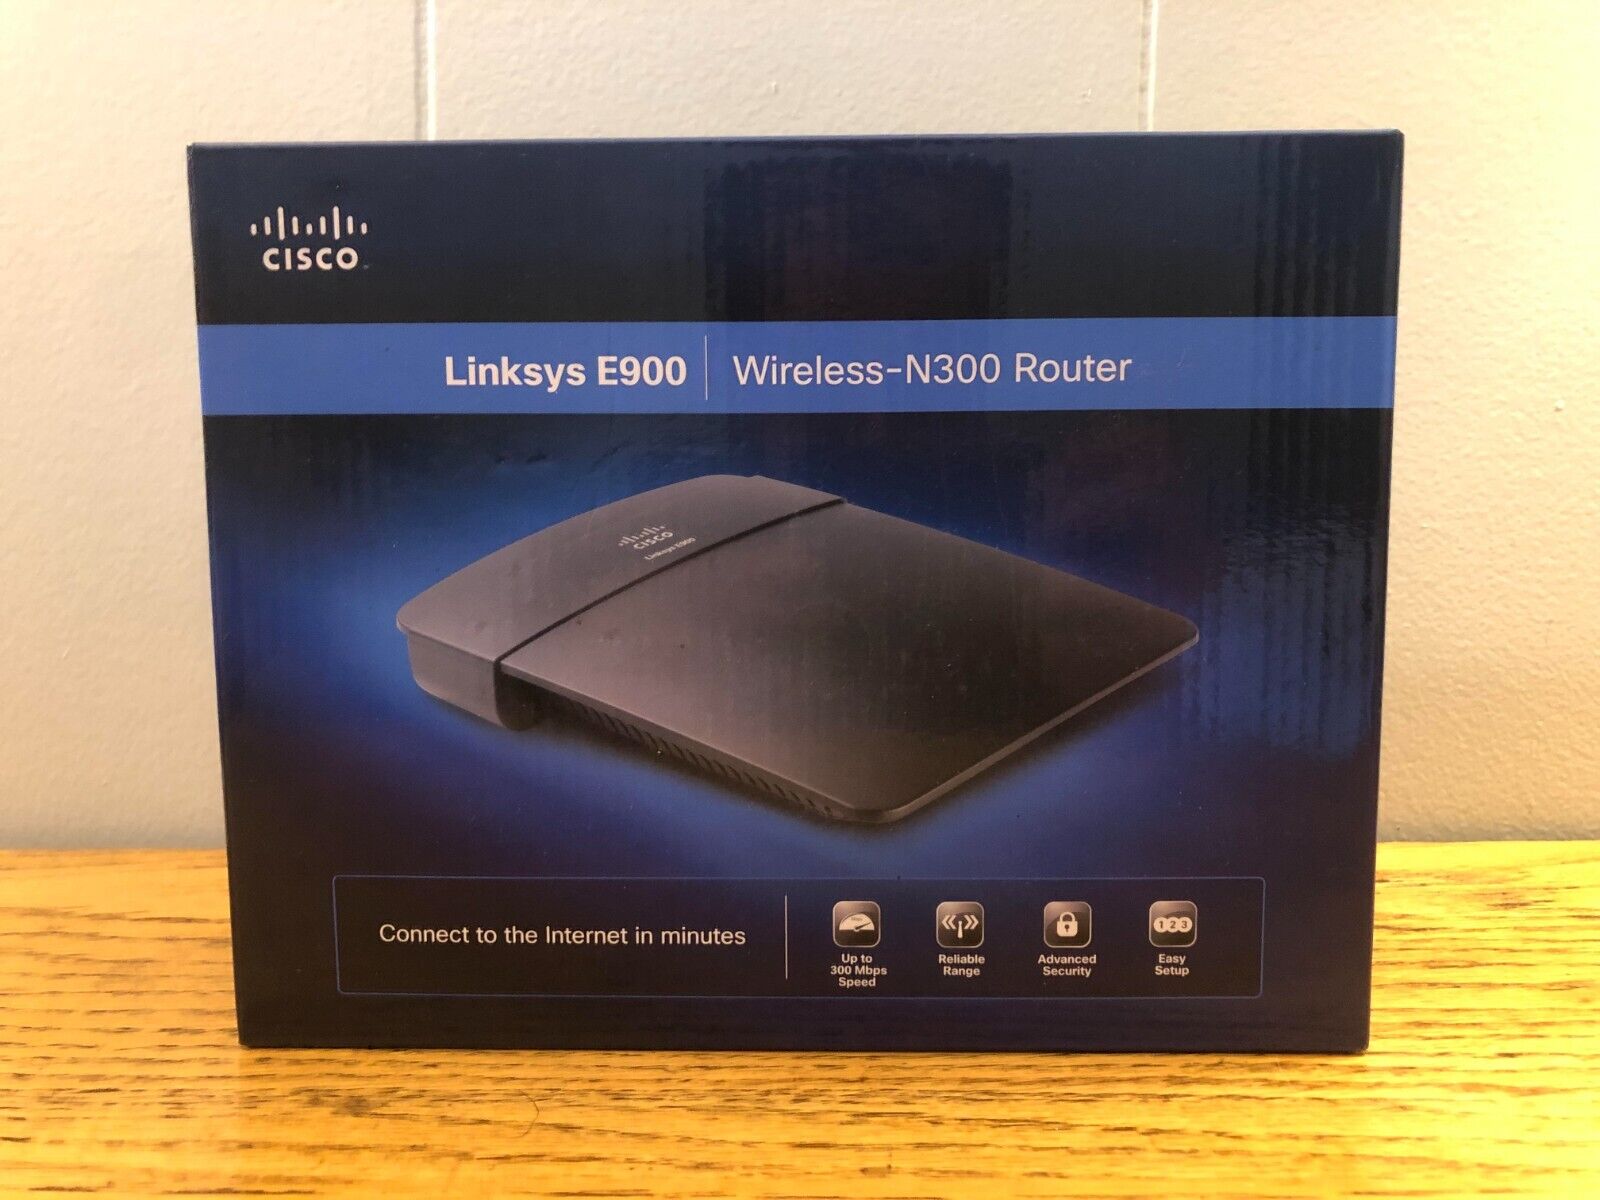 Cisco Linksys E900 Wireless-N300 Router (Windows Mac) Tested READ